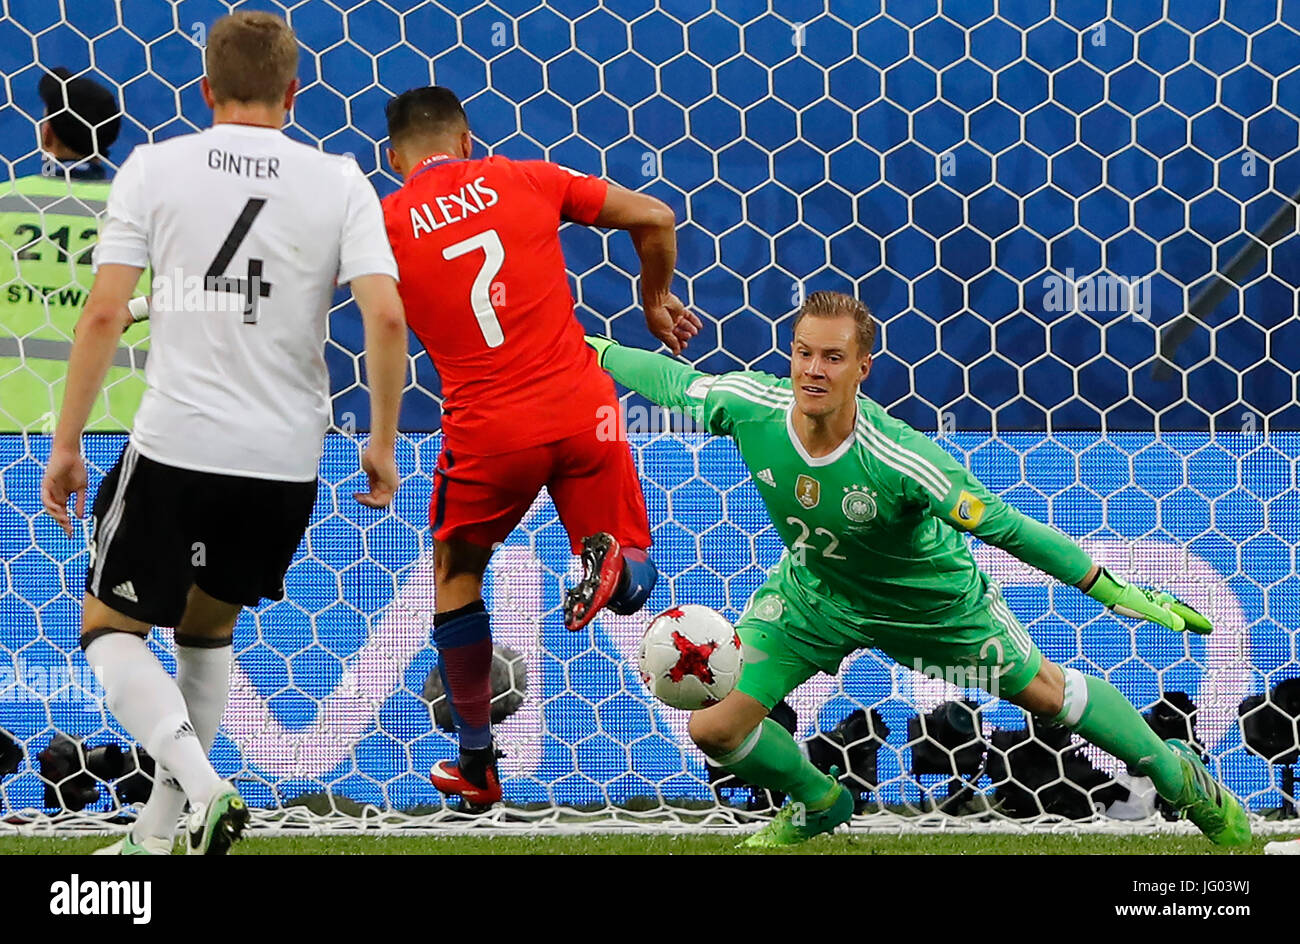 St Petersburg, Russia. 2nd July, 2017. CHILE VS GERMANY - Marc-Andre TER STEGEN of Germany defends from the chase of Alexis SANCHEZ of Chile during a match between Chile and Germany at the final of the Confederations Cup 2017, on Sunday (2), held at the Krestovsky Stadium (Zenit Arena) in St. Petersburg, Russia. (Photo: Rodolfo Buhrer/La Imagem/Fotoarena/Alamy Live News) Stock Photo